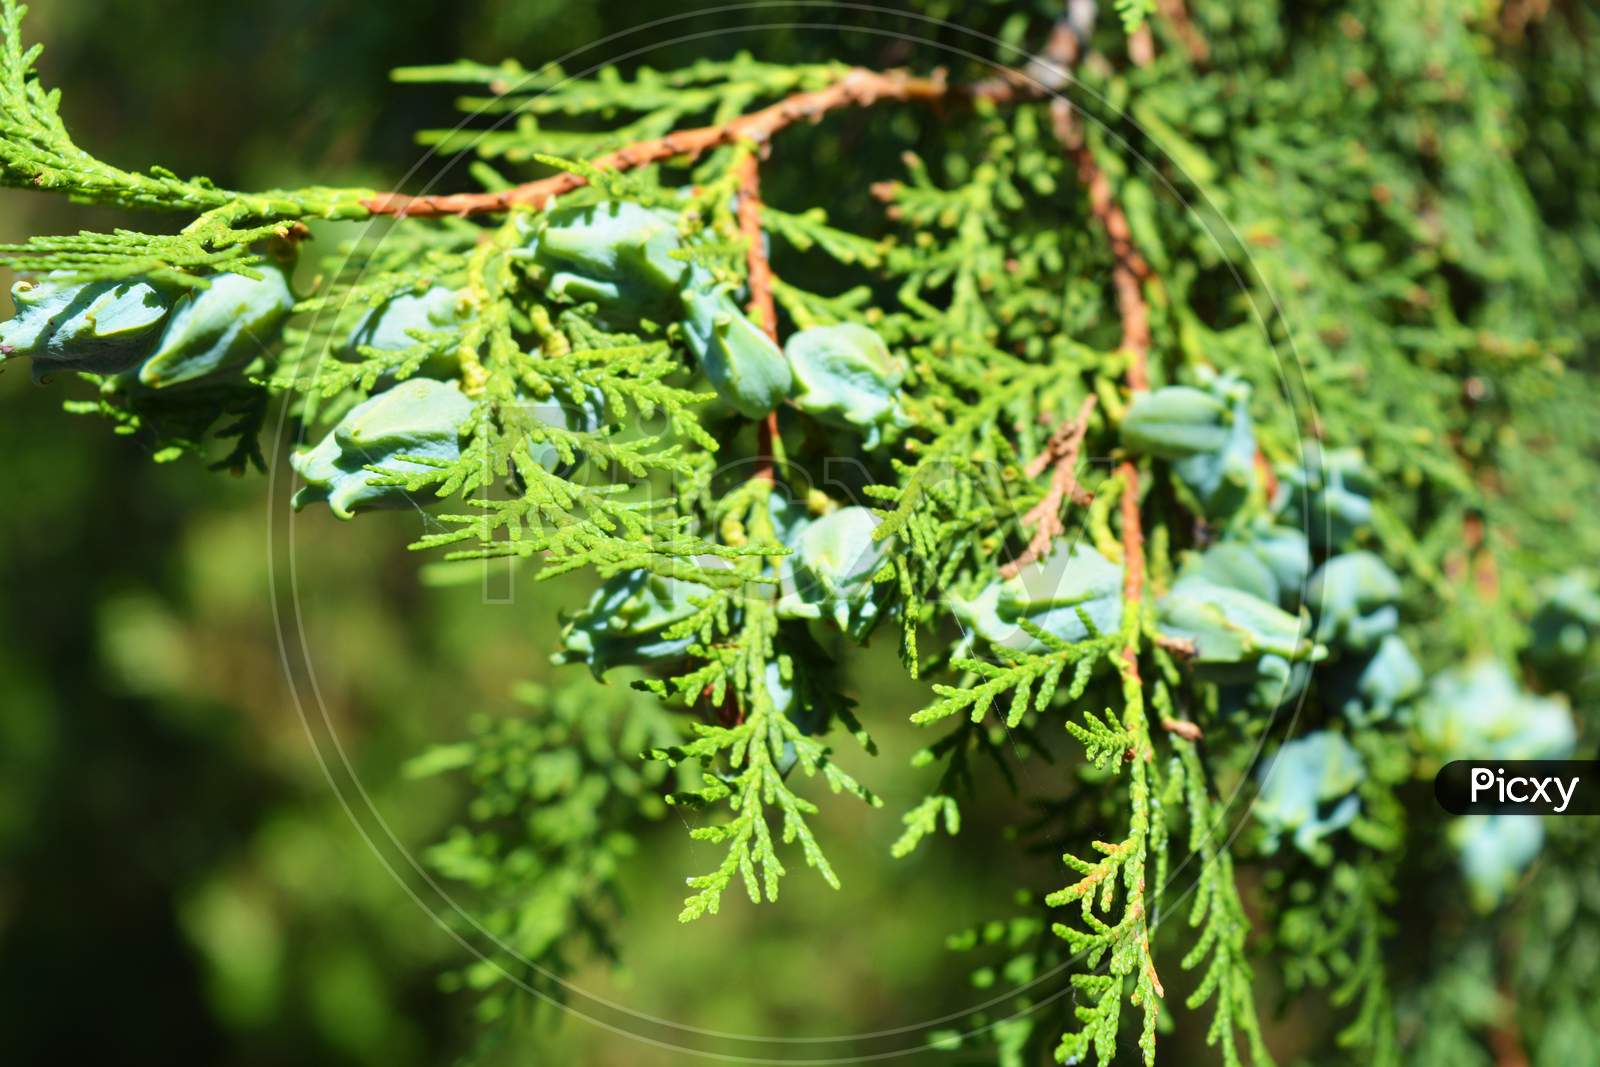 Exquisite leaves, needles, thuja branches with cones illuminated by the autumn sun.